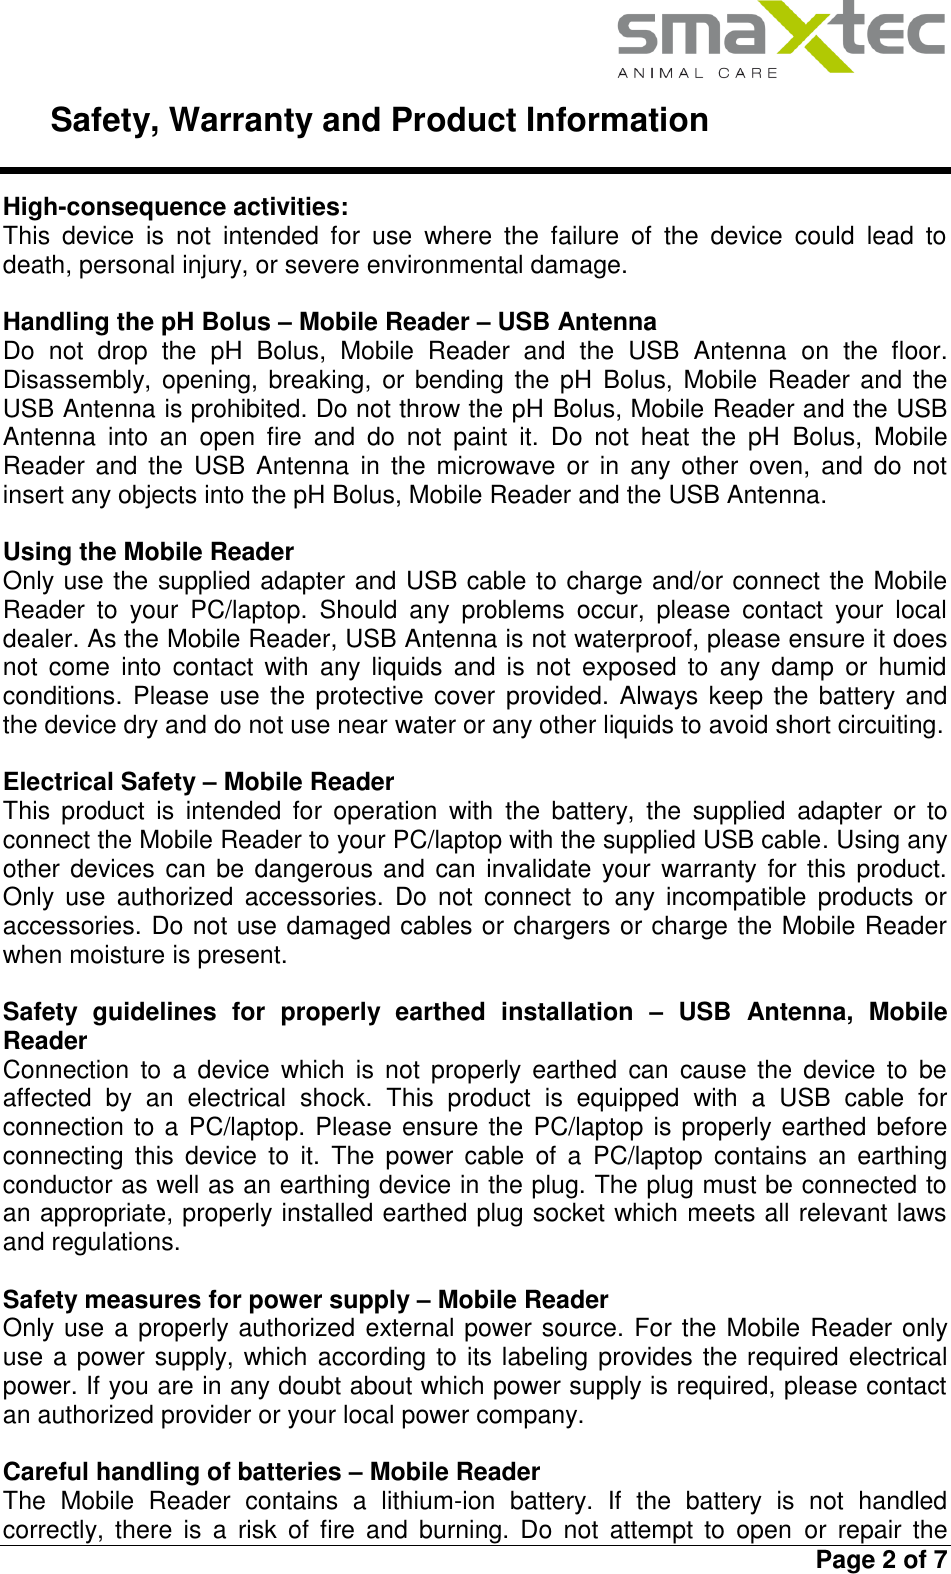     Safety, Warranty and Product Information   Page 2 of 7  High-consequence activities: This  device  is  not  intended  for  use  where  the  failure  of  the  device  could  lead  to death, personal injury, or severe environmental damage.  Handling the pH Bolus – Mobile Reader – USB Antenna Do  not  drop  the  pH  Bolus,  Mobile  Reader  and  the  USB  Antenna  on  the  floor. Disassembly, opening, breaking, or bending the pH  Bolus,  Mobile  Reader  and  the USB Antenna is prohibited. Do not throw the pH Bolus, Mobile Reader and the USB Antenna  into  an  open  fire  and  do  not  paint  it.  Do  not  heat  the  pH  Bolus,  Mobile Reader  and  the  USB Antenna  in  the  microwave  or  in  any other  oven,  and do not insert any objects into the pH Bolus, Mobile Reader and the USB Antenna.  Using the Mobile Reader Only use the supplied adapter and USB cable to charge and/or connect the Mobile Reader  to  your  PC/laptop.  Should  any  problems  occur,  please  contact  your  local dealer. As the Mobile Reader, USB Antenna is not waterproof, please ensure it does not  come  into  contact  with  any  liquids  and  is  not  exposed  to  any  damp  or  humid conditions. Please use the protective cover provided. Always keep the battery  and the device dry and do not use near water or any other liquids to avoid short circuiting.  Electrical Safety – Mobile Reader This  product  is  intended  for  operation  with  the  battery,  the  supplied  adapter  or  to connect the Mobile Reader to your PC/laptop with the supplied USB cable. Using any other devices can be dangerous and can invalidate your warranty  for  this product. Only  use  authorized  accessories.  Do  not  connect  to  any  incompatible  products  or accessories. Do not use damaged cables or chargers or charge the Mobile Reader when moisture is present.  Safety  guidelines  for  properly  earthed  installation  –  USB  Antenna,  Mobile Reader Connection  to  a  device  which  is  not properly  earthed  can  cause  the  device  to  be affected  by  an  electrical  shock.  This  product  is  equipped  with  a  USB  cable  for connection to a PC/laptop. Please ensure the PC/laptop is properly earthed before connecting  this  device  to  it.  The  power  cable  of  a  PC/laptop  contains  an  earthing conductor as well as an earthing device in the plug. The plug must be connected to an appropriate, properly installed earthed plug socket which meets all relevant laws and regulations.  Safety measures for power supply – Mobile Reader Only use a properly authorized external power source. For the Mobile Reader only use a power supply, which according to its labeling provides the required electrical power. If you are in any doubt about which power supply is required, please contact an authorized provider or your local power company.   Careful handling of batteries – Mobile Reader The  Mobile  Reader  contains  a  lithium-ion  battery.  If  the  battery  is  not  handled correctly,  there  is  a  risk  of fire  and burning.  Do  not  attempt  to  open  or  repair  the 